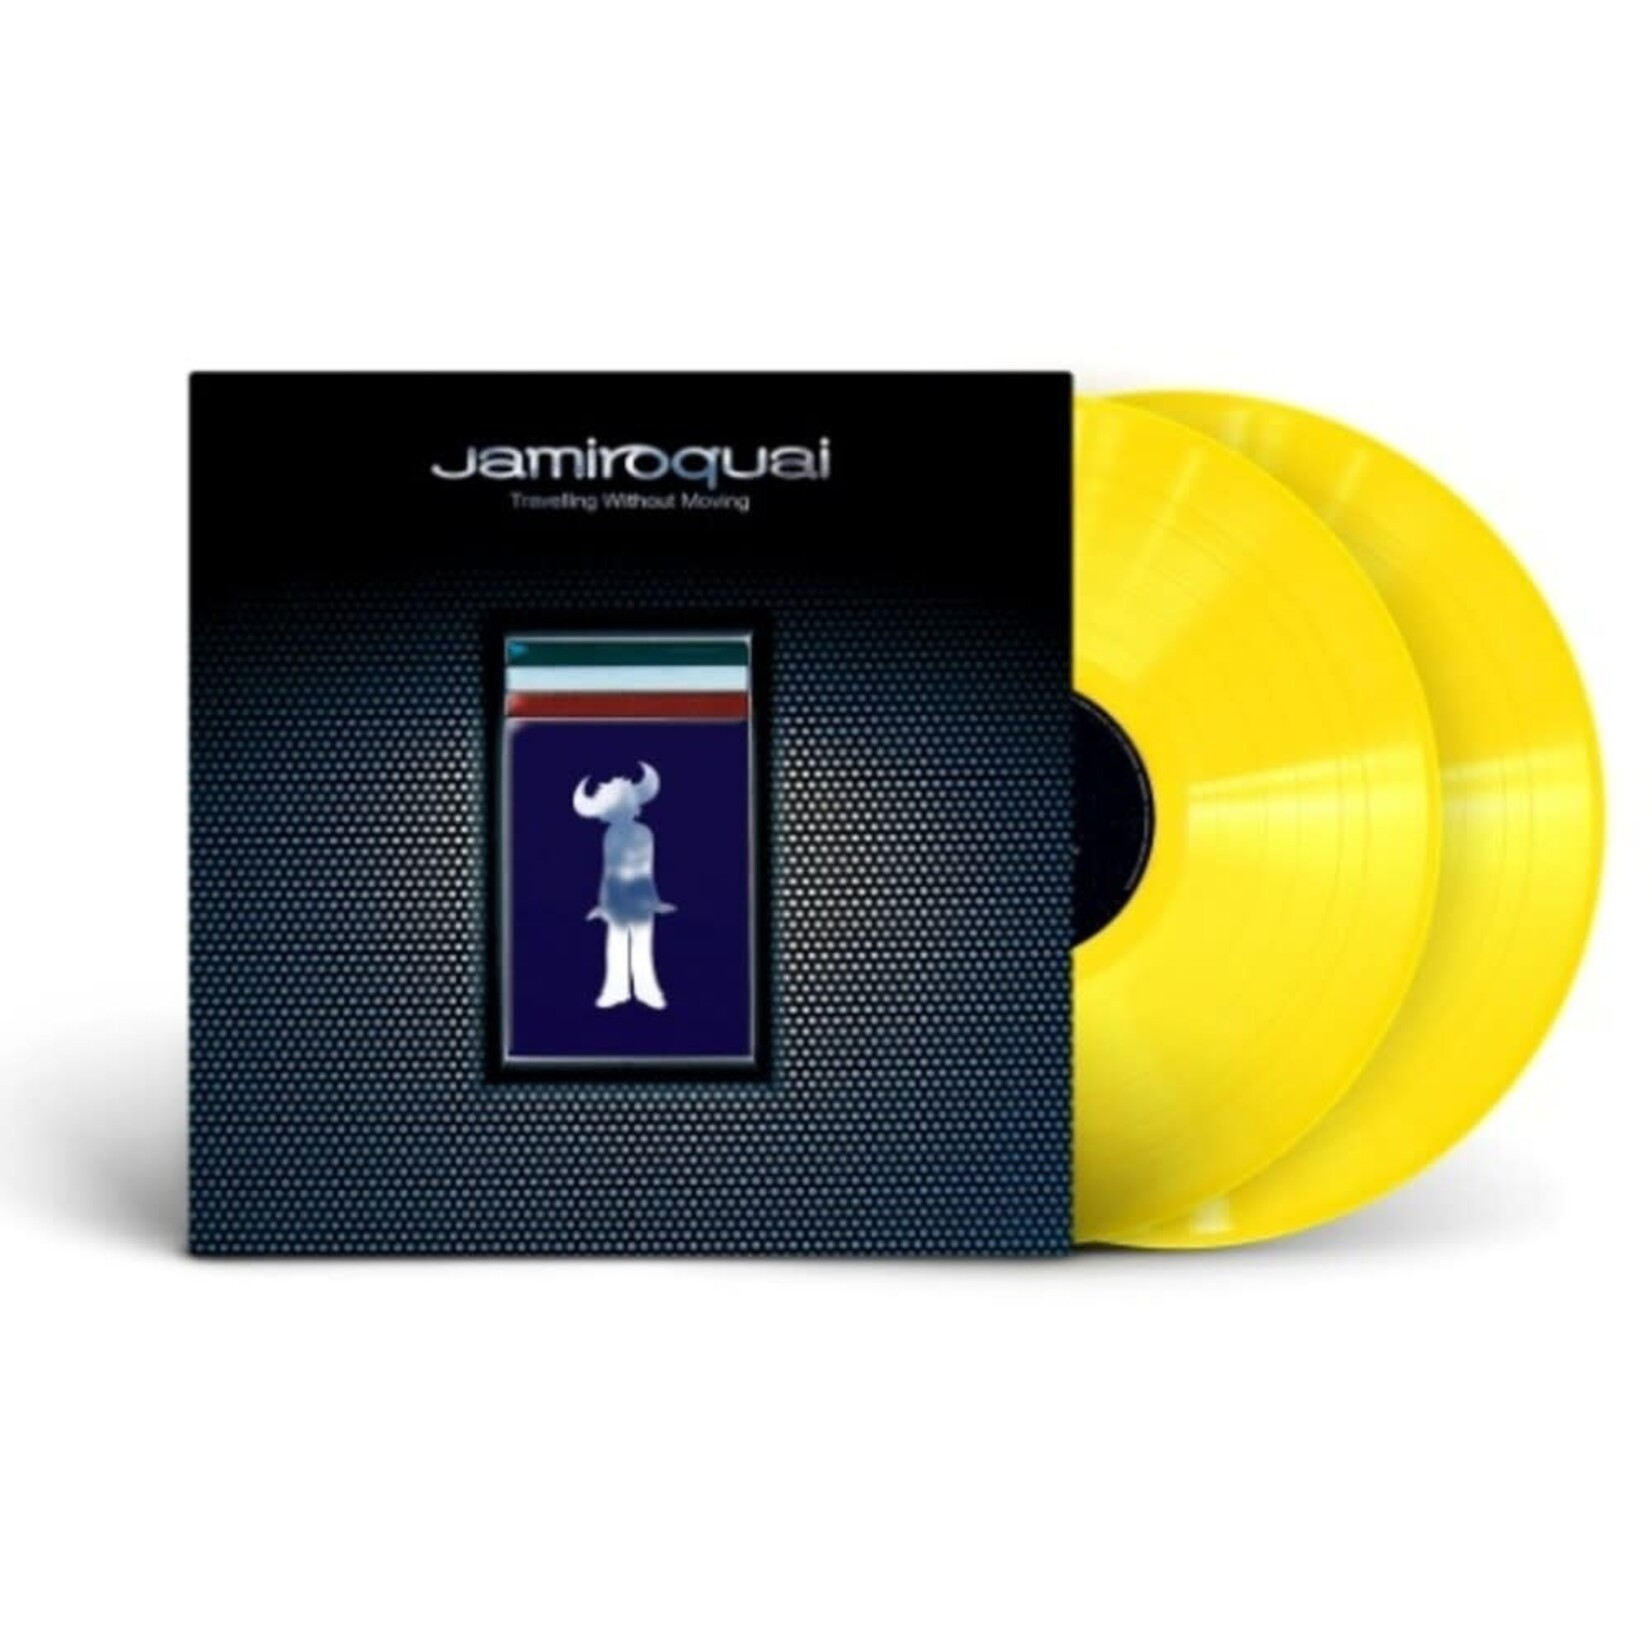 [New] Jamiroquai - Travelling Without Moving (2LP, 25th Anniversary Edition, yellow vinyl)